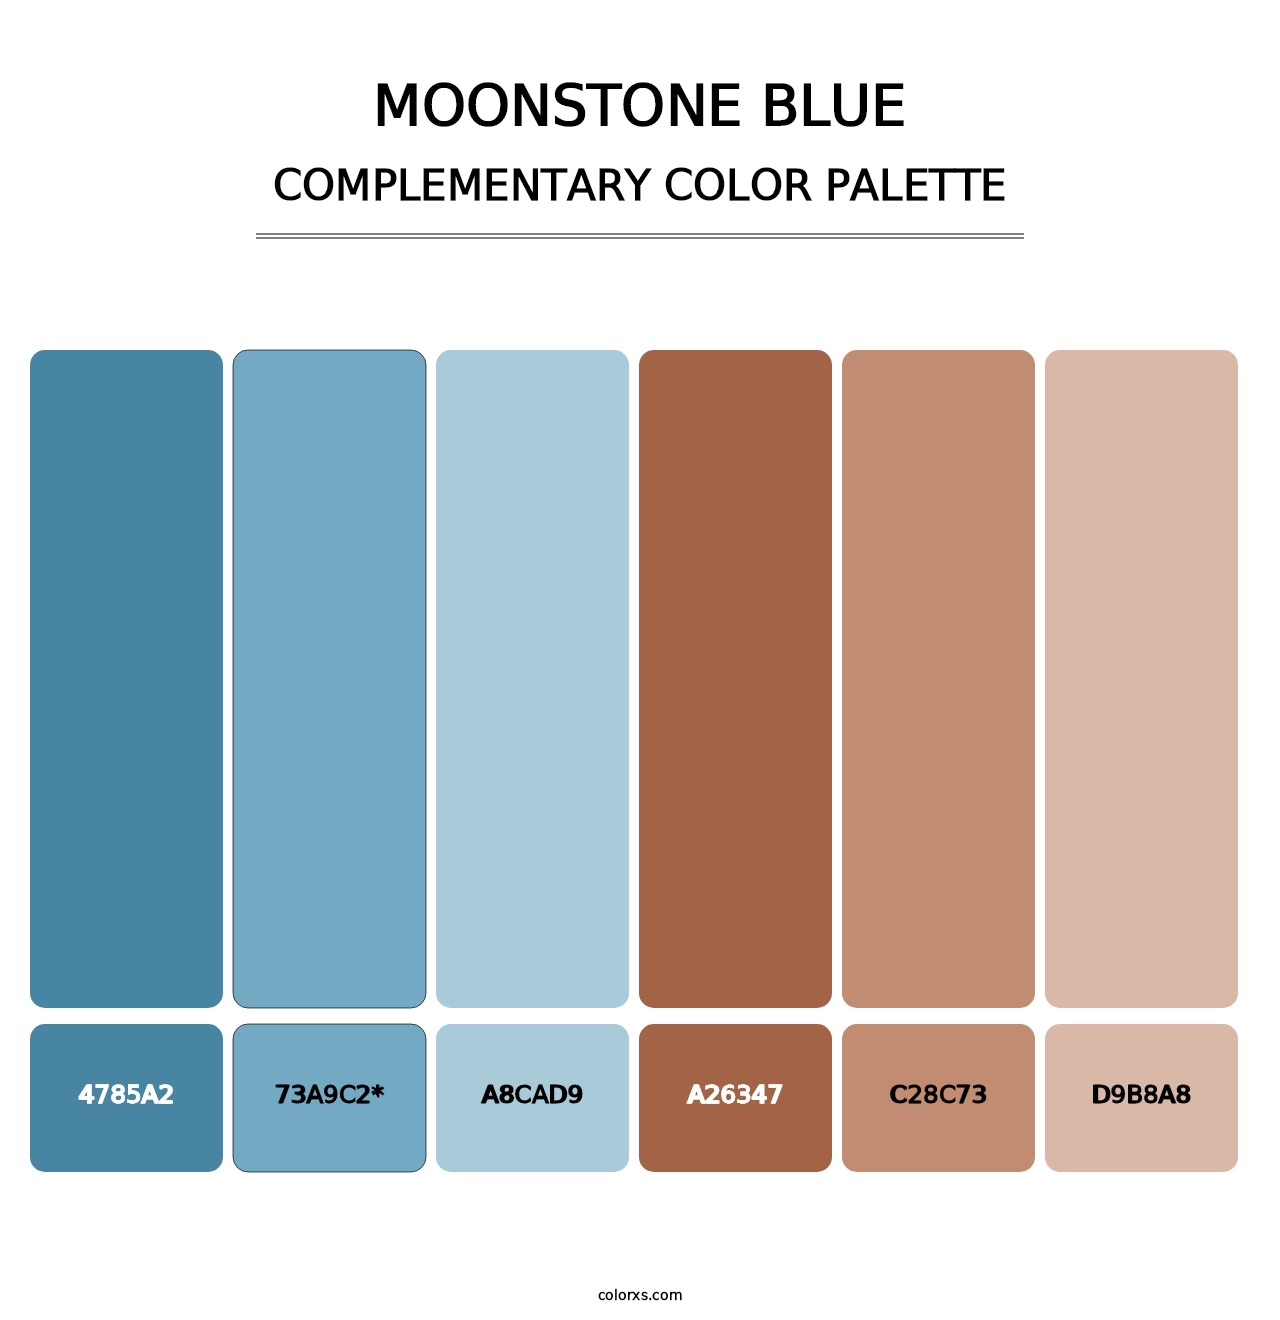 Moonstone Blue - Complementary Color Palette